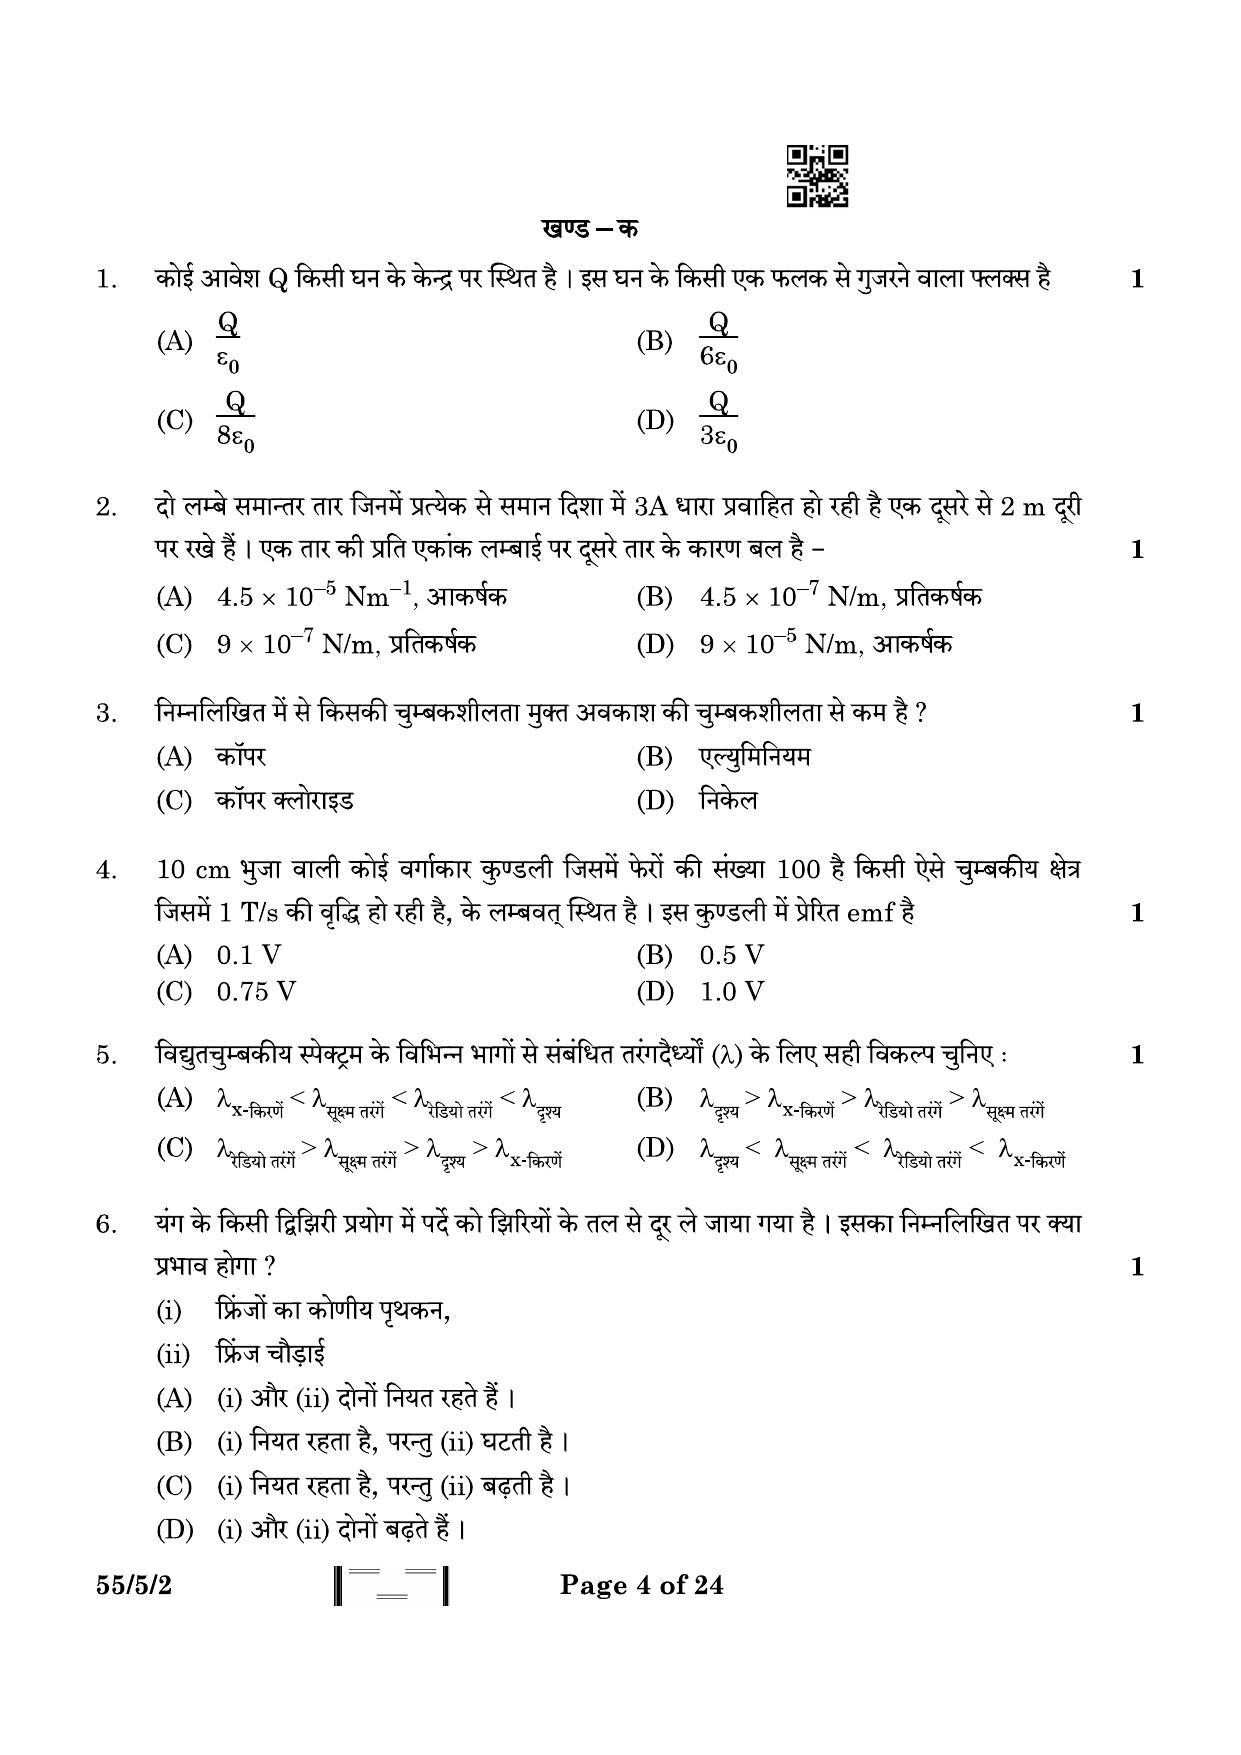 CBSE Class 12 55-5-2 Physics 2023 Question Paper - Page 4